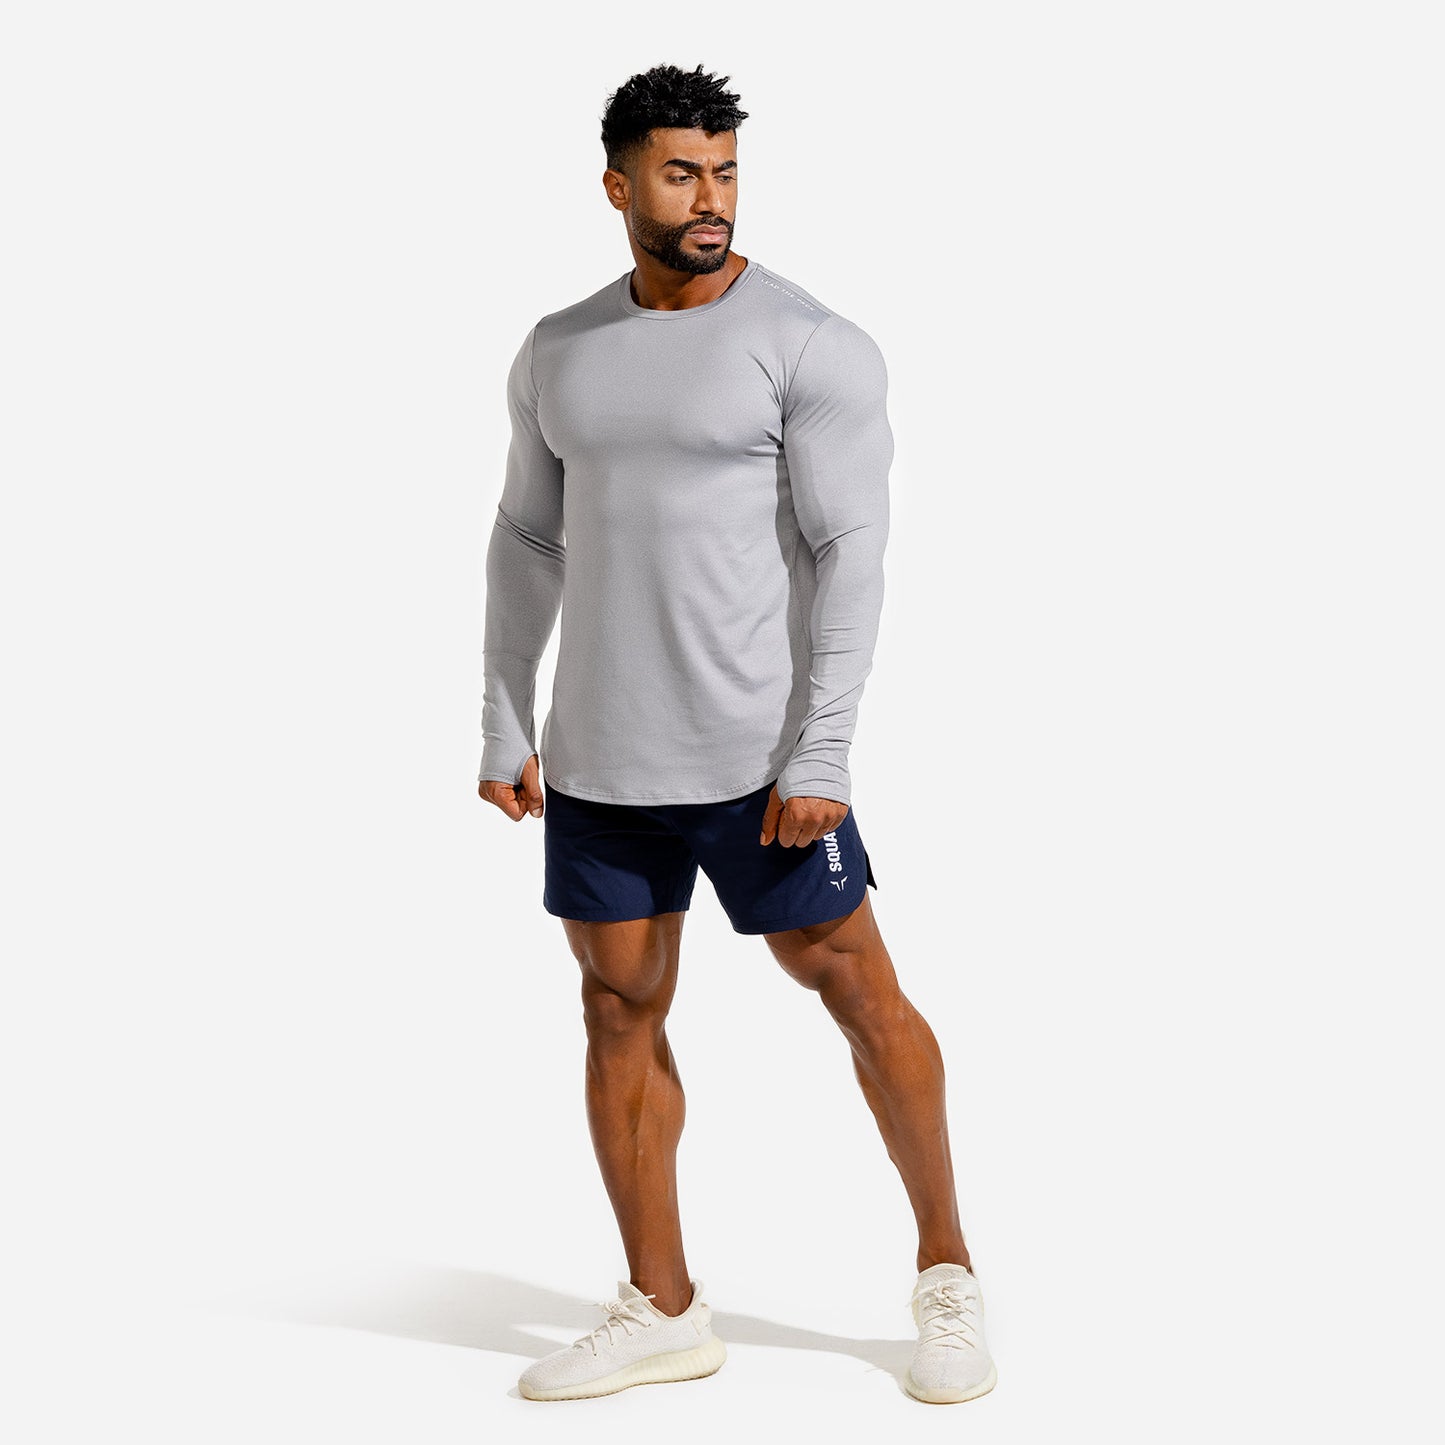 squatwolf-gym-wear-statement-muscle-tee-grey-workout-shirts-for-men